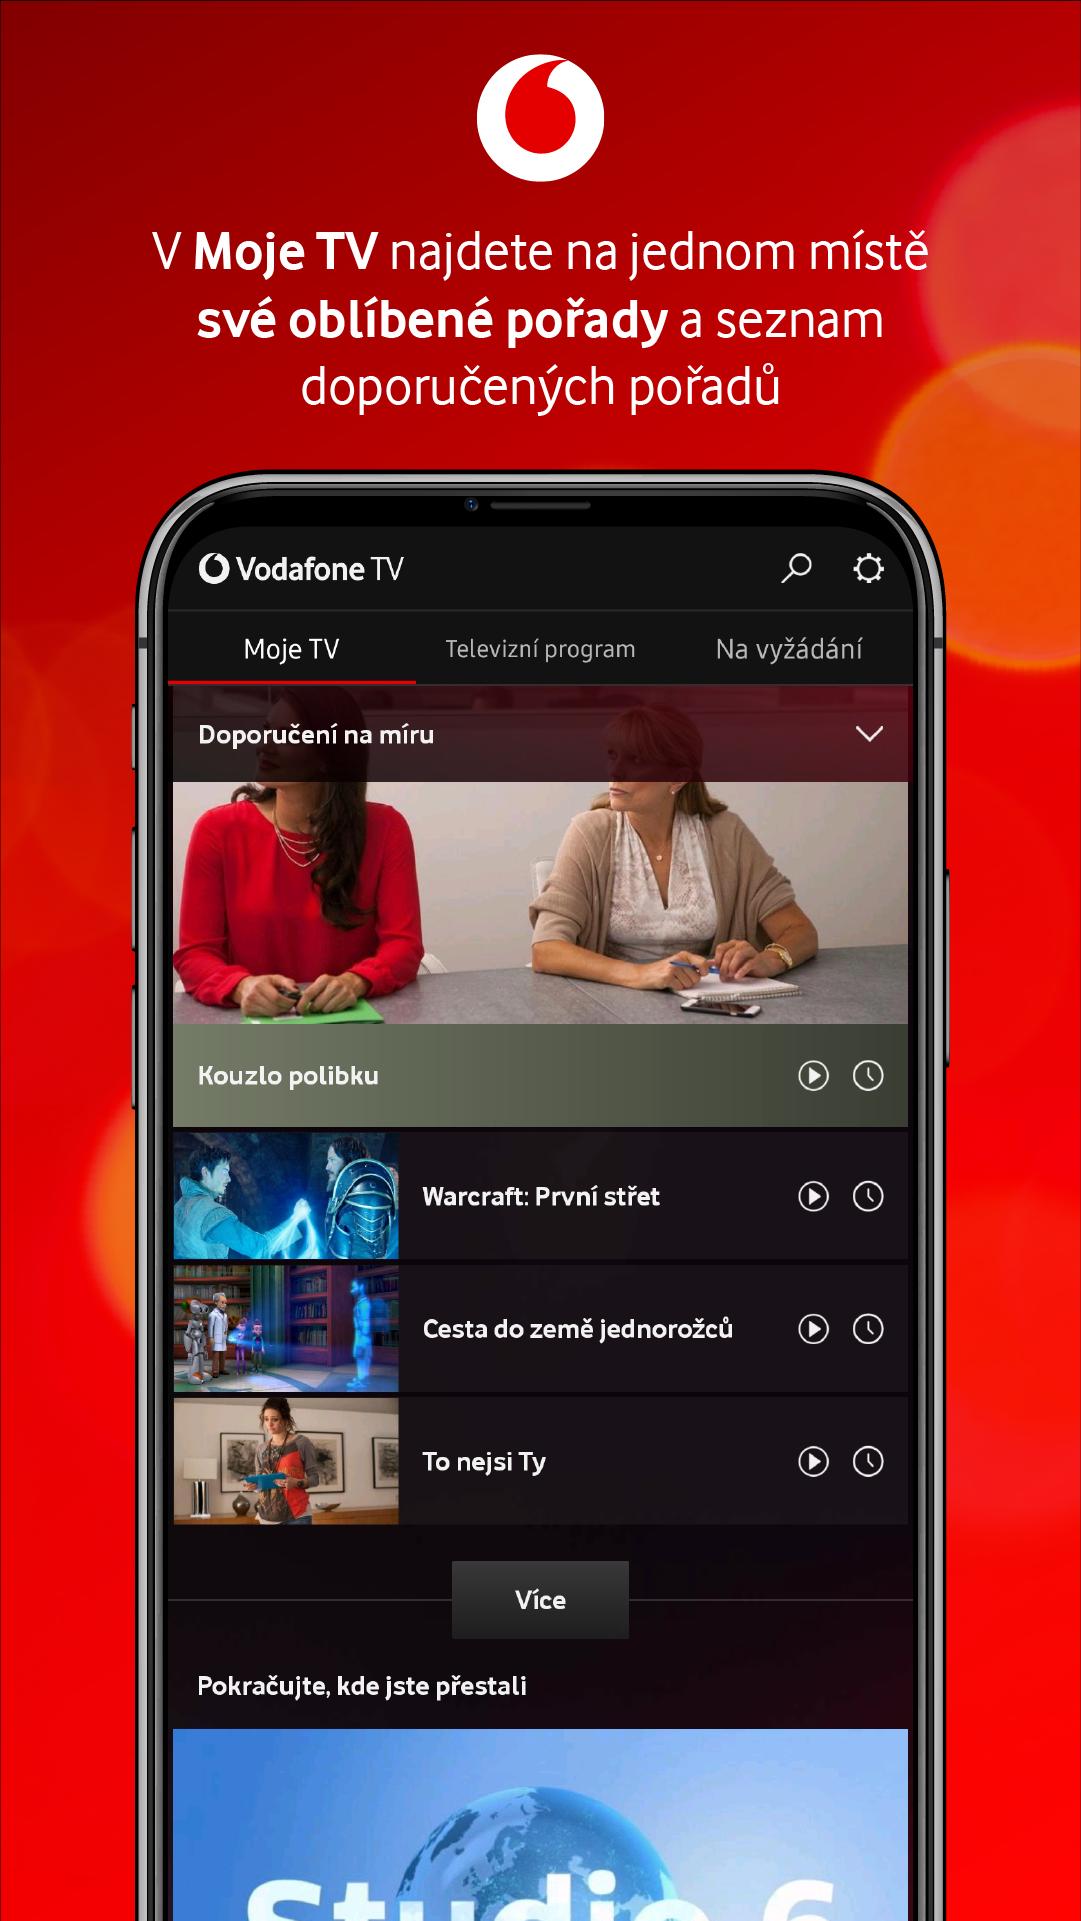 Vodafone TV (CZ) for Android - APK Download